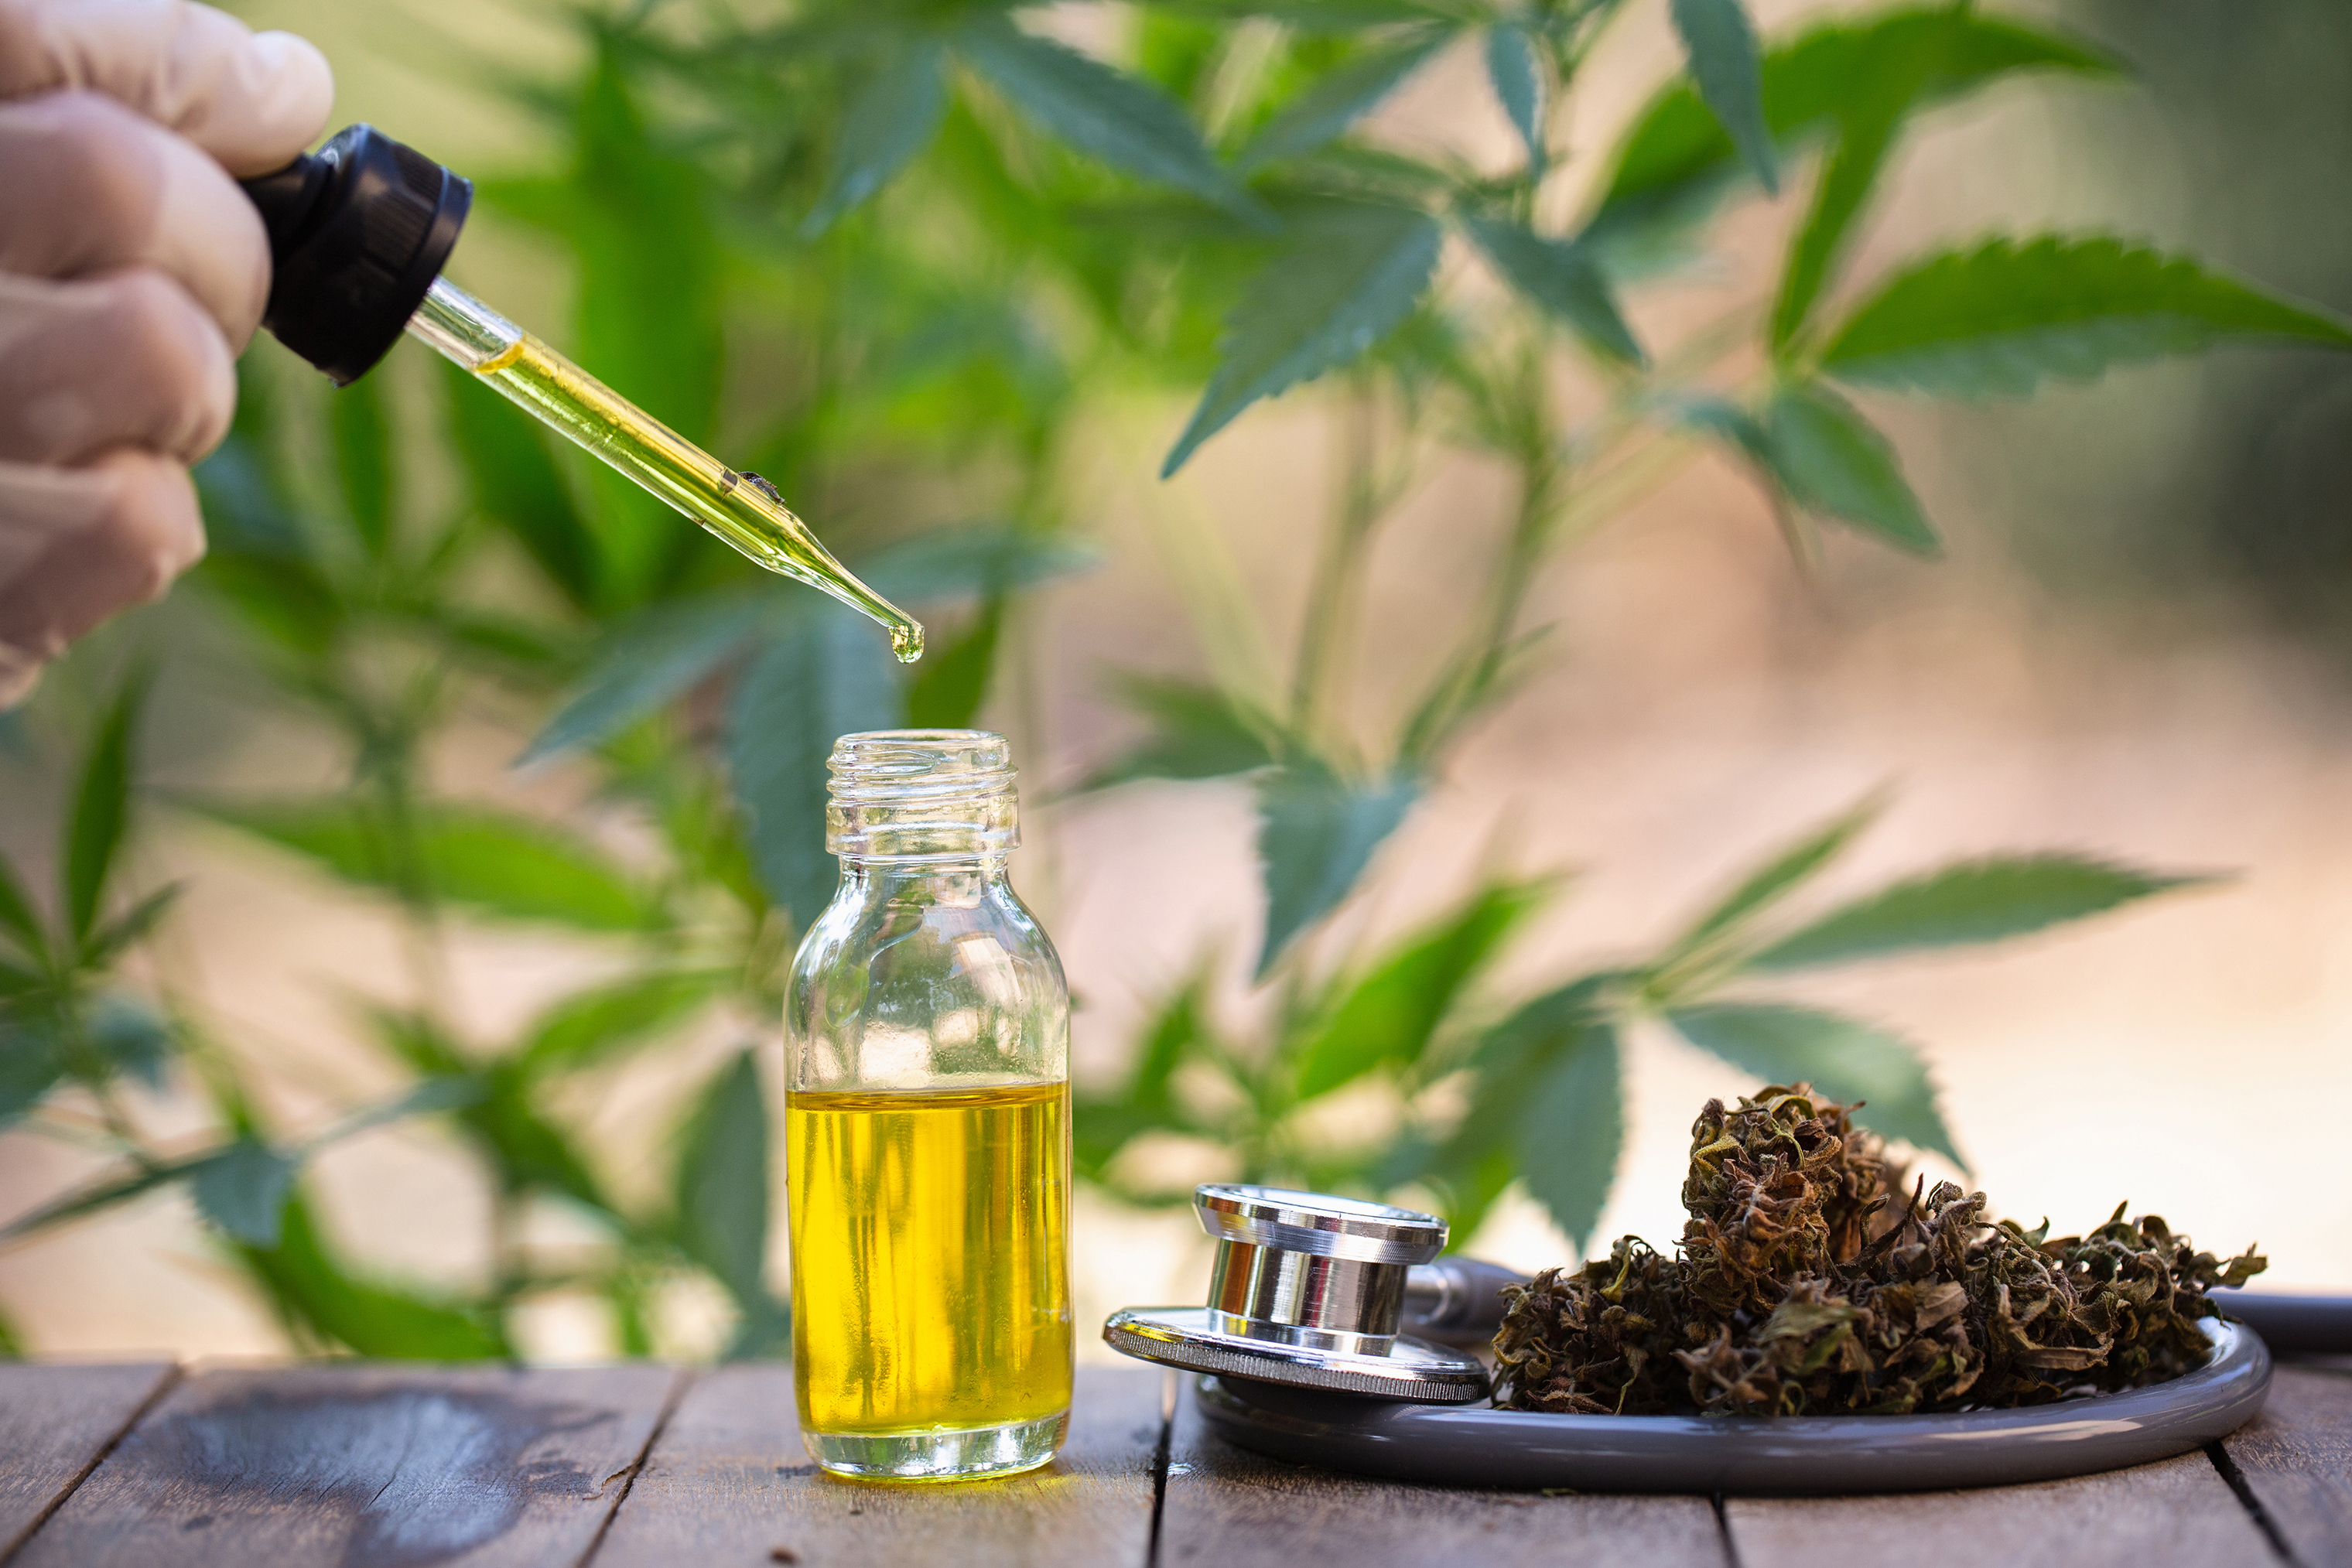 Who Can I Talk With About Cbd Oil - Cbd|Oil|Cannabidiol|Products|View|Abstract|Effects|Hemp|Cannabis|Product|Thc|Pain|People|Health|Body|Plant|Cannabinoids|Medications|Oils|Drug|Benefits|System|Study|Marijuana|Anxiety|Side|Research|Effect|Liver|Quality|Treatment|Studies|Epilepsy|Symptoms|Gummies|Compounds|Dose|Time|Inflammation|Bottle|Cbd Oil|View Abstract|Side Effects|Cbd Products|Endocannabinoid System|Multiple Sclerosis|Cbd Oils|Cbd Gummies|Cannabis Plant|Hemp Oil|Cbd Product|Hemp Plant|United States|Cytochrome P450|Many People|Chronic Pain|Nuleaf Naturals|Royal Cbd|Full-Spectrum Cbd Oil|Drug Administration|Cbd Oil Products|Medical Marijuana|Drug Test|Heavy Metals|Clinical Trial|Clinical Trials|Cbd Oil Side|Rating Highlights|Wide Variety|Animal Studies